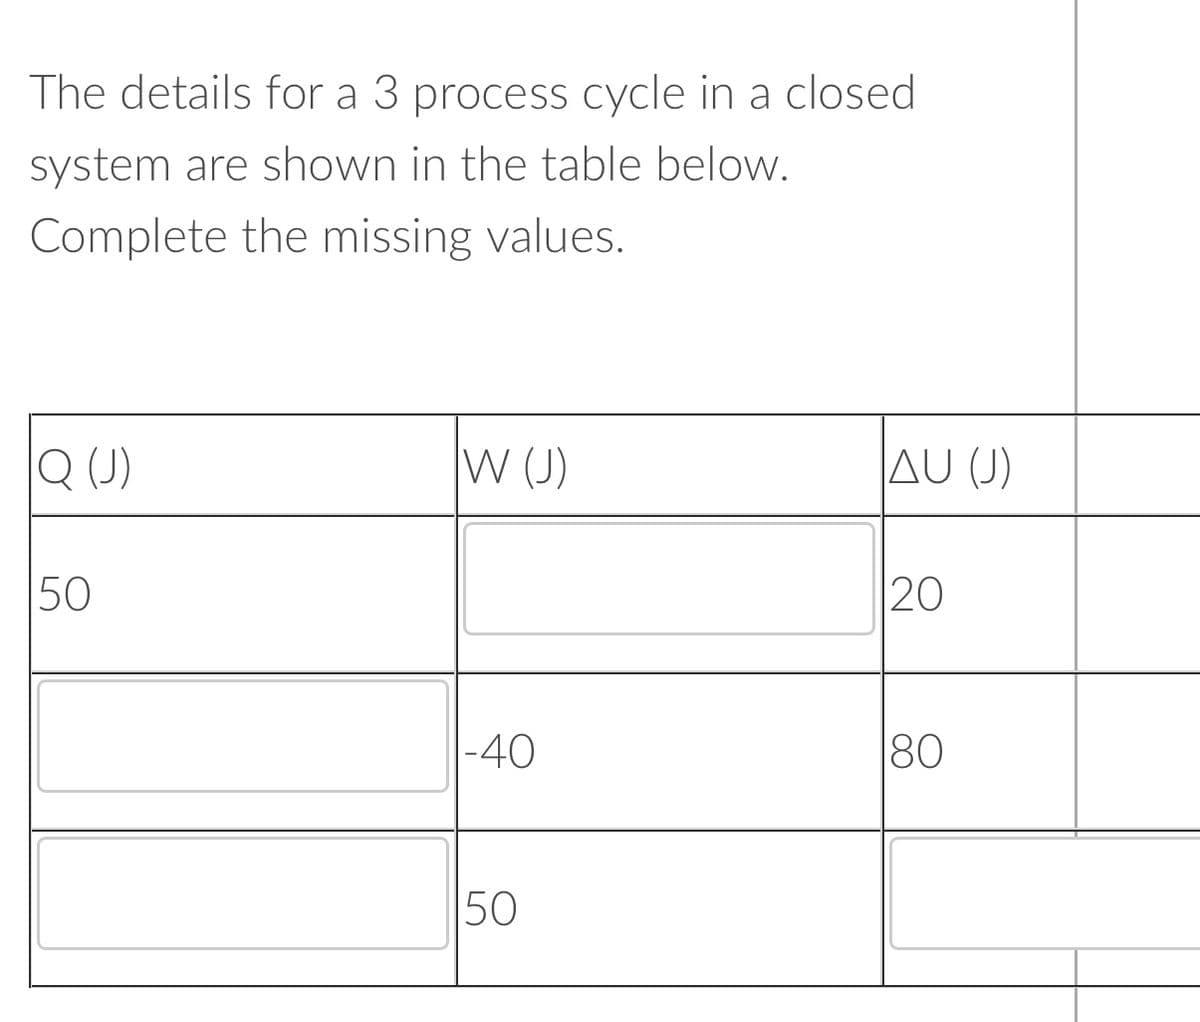 The details for a 3 process cycle in a closed
system are shown in the table below.
Complete the missing values.
Q (J)
W (J)
AU (J)
50
20
|-40
80
50
